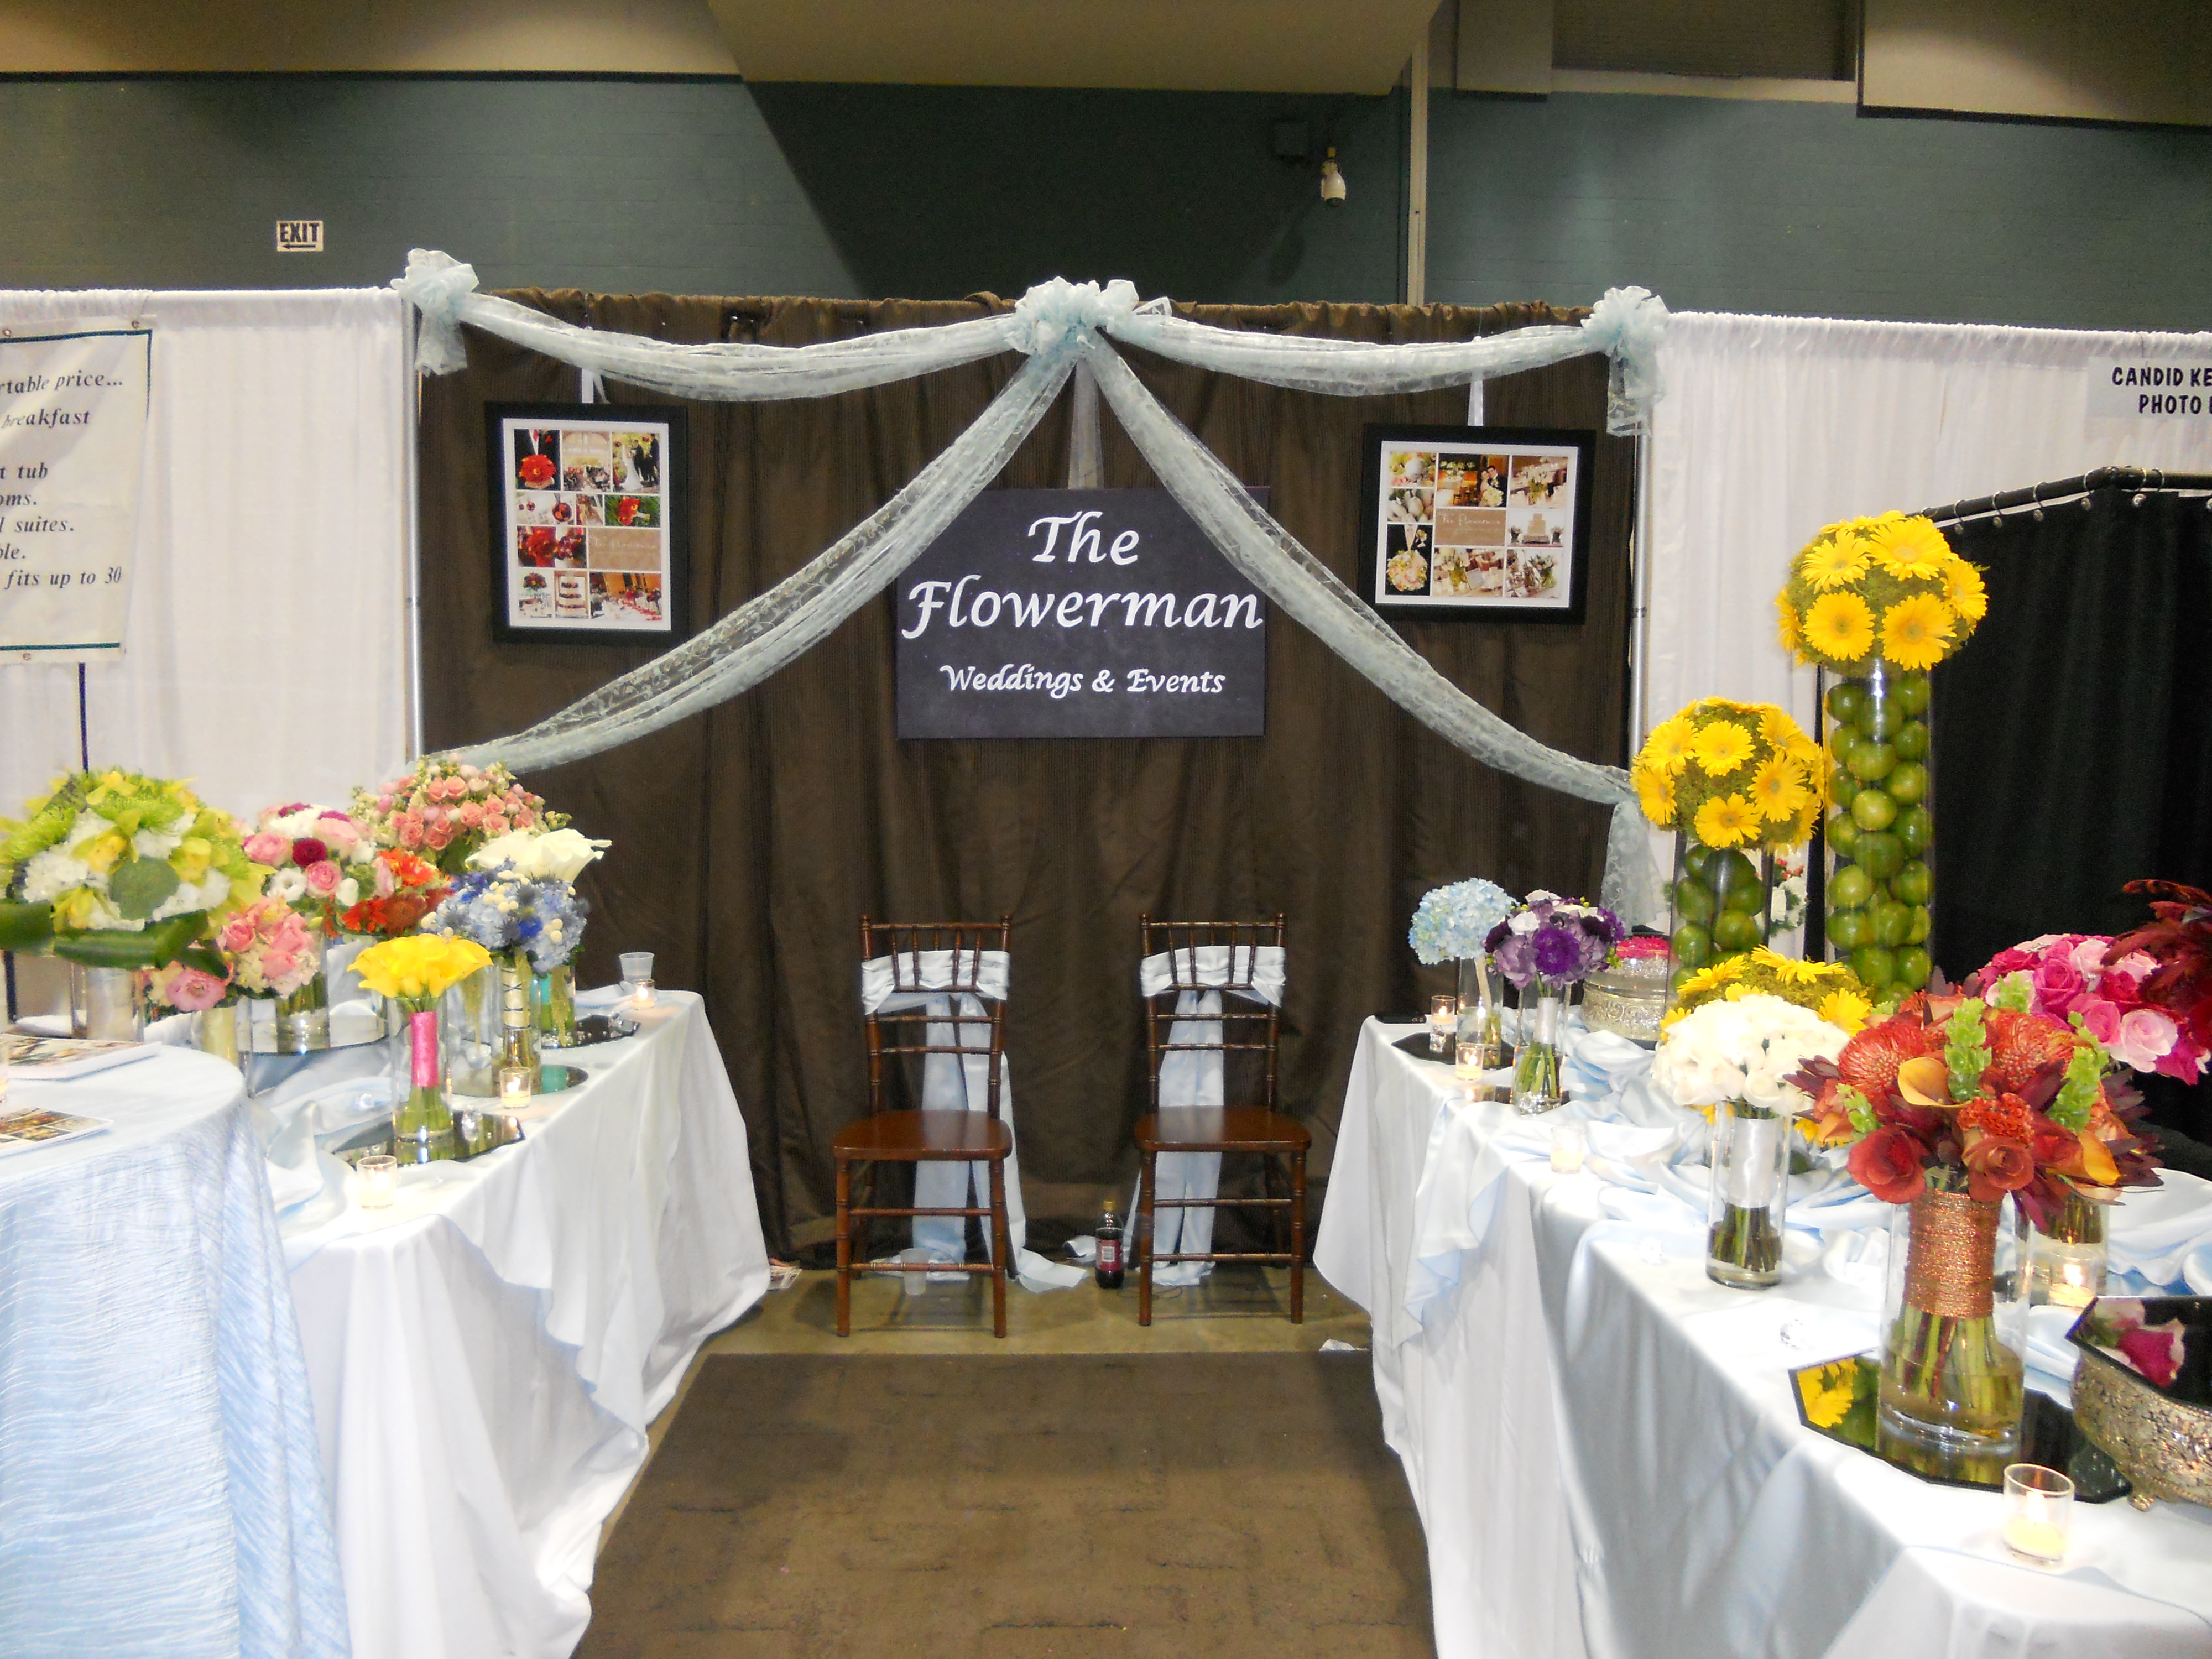 at our bridal show booth